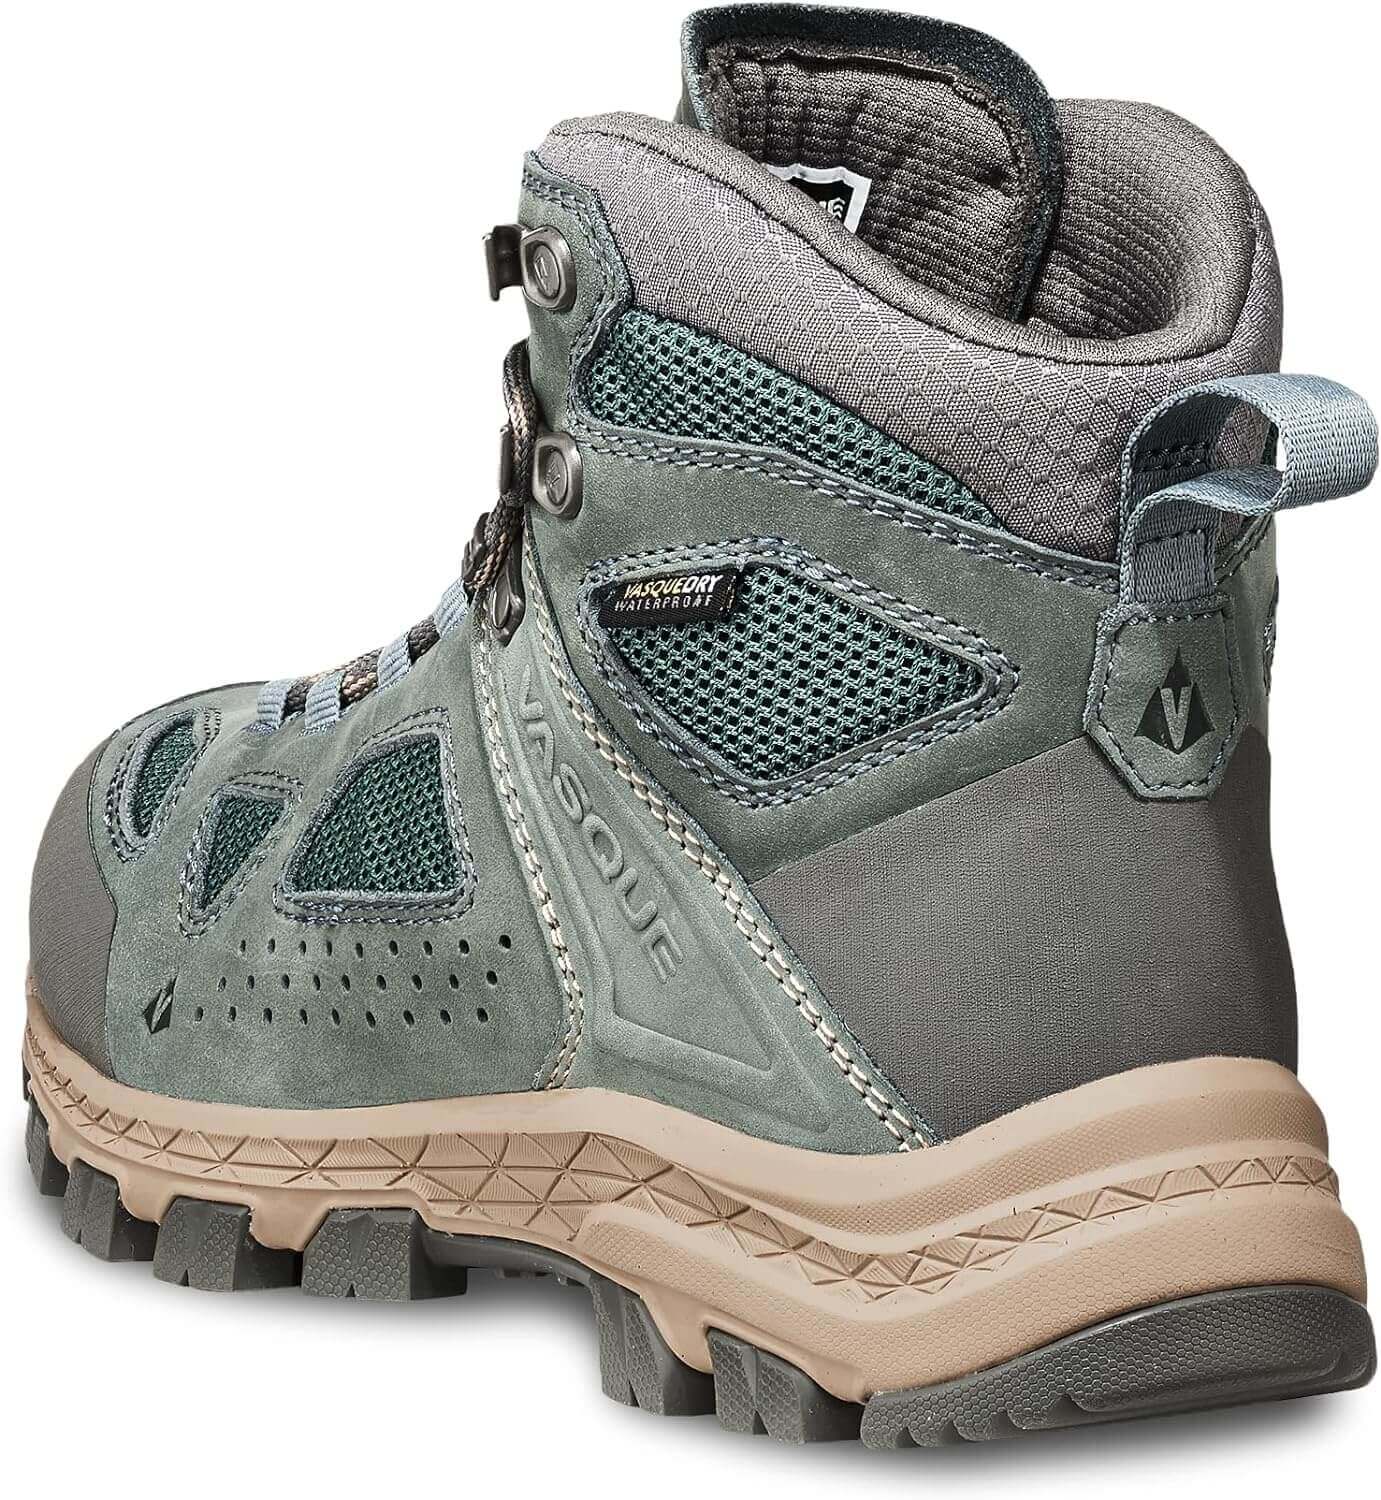 Shop The Latest >Vasque Women's Breeze Hiking Boots > *Only $216.00*> From The Top Brand > *Vasquel* > Shop Now and Get Free Shipping On Orders Over $45.00 >*Shop Earth Foot*